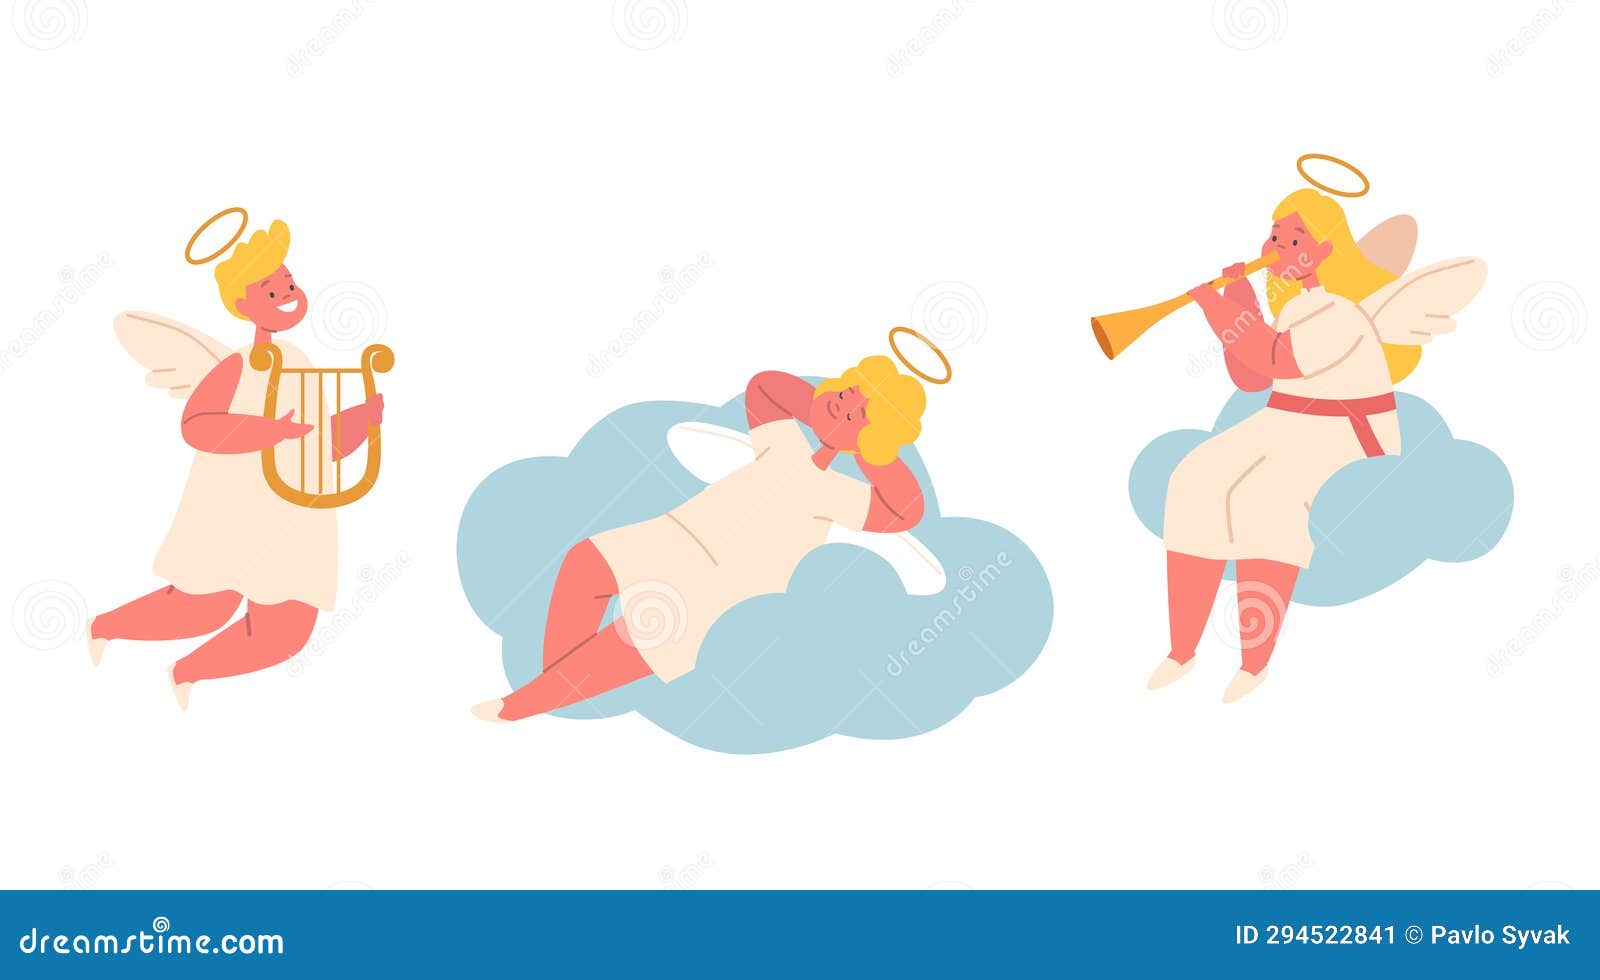 cute angels characters on clouds, cherubic and pure little messengers with harp and trumpet,  